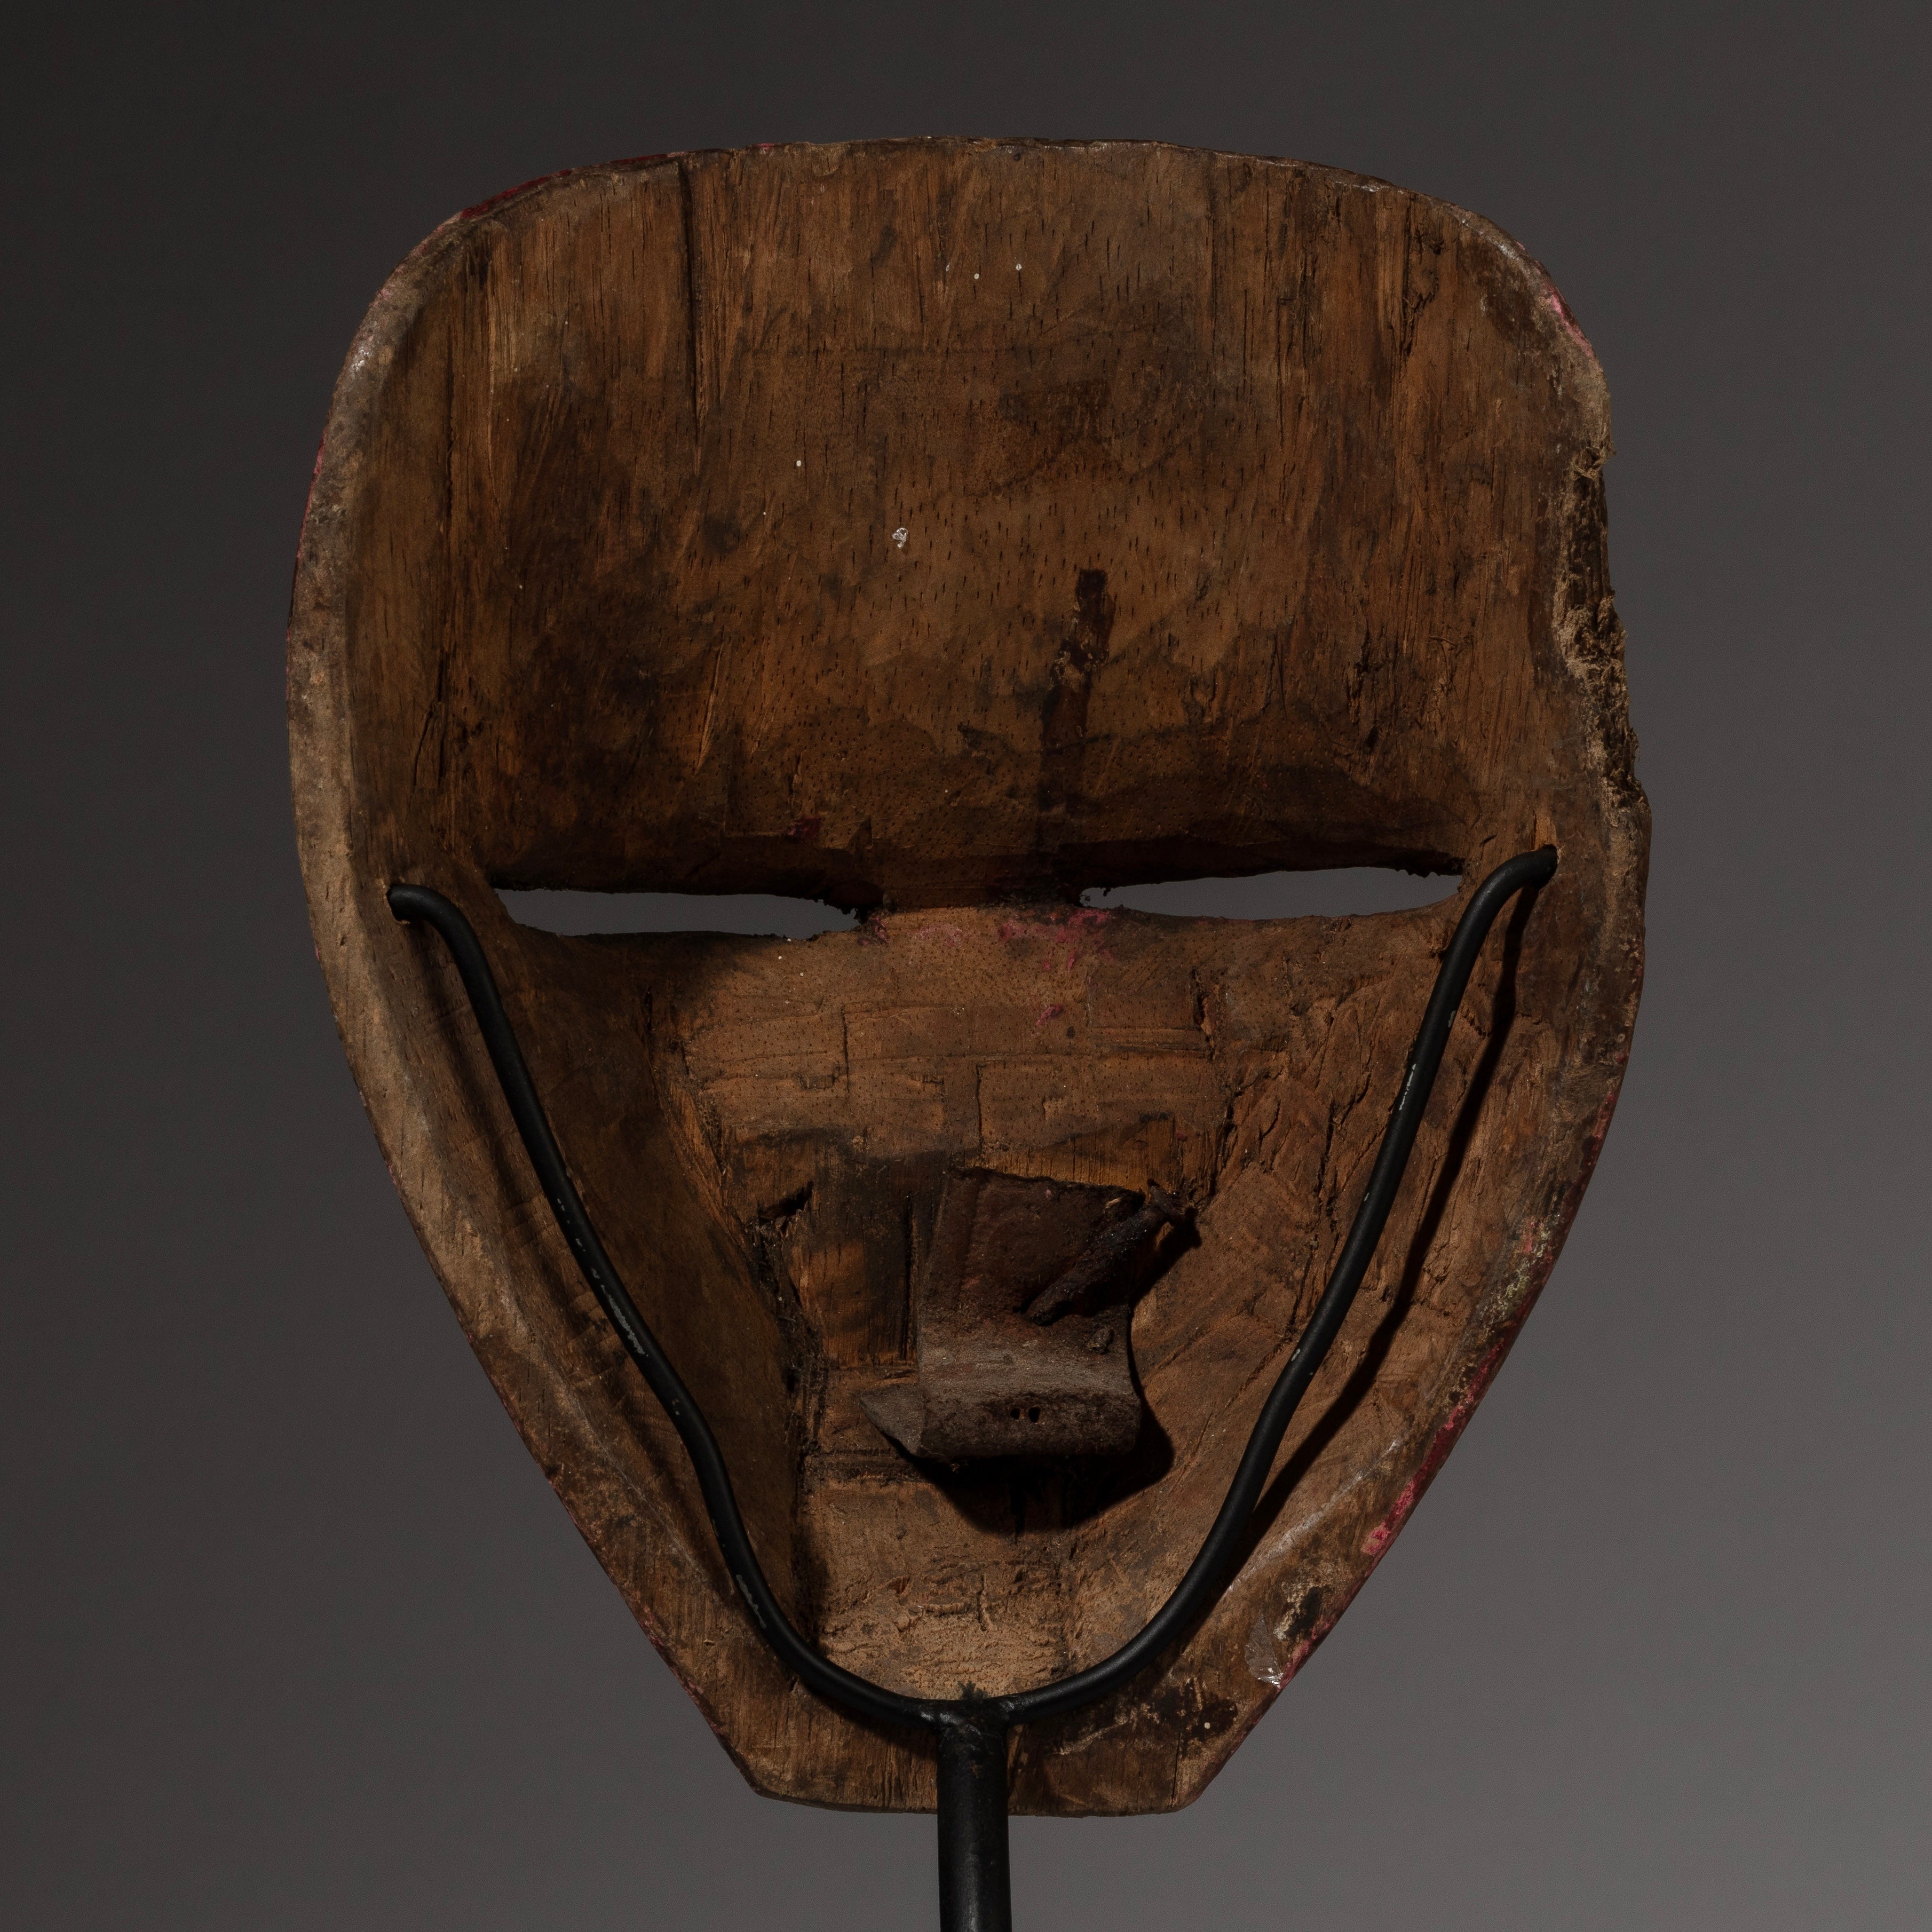 AN ELEGANT DEEP RED JAVANESE TOPENG MASK FROM INDONESIA( No 1901)